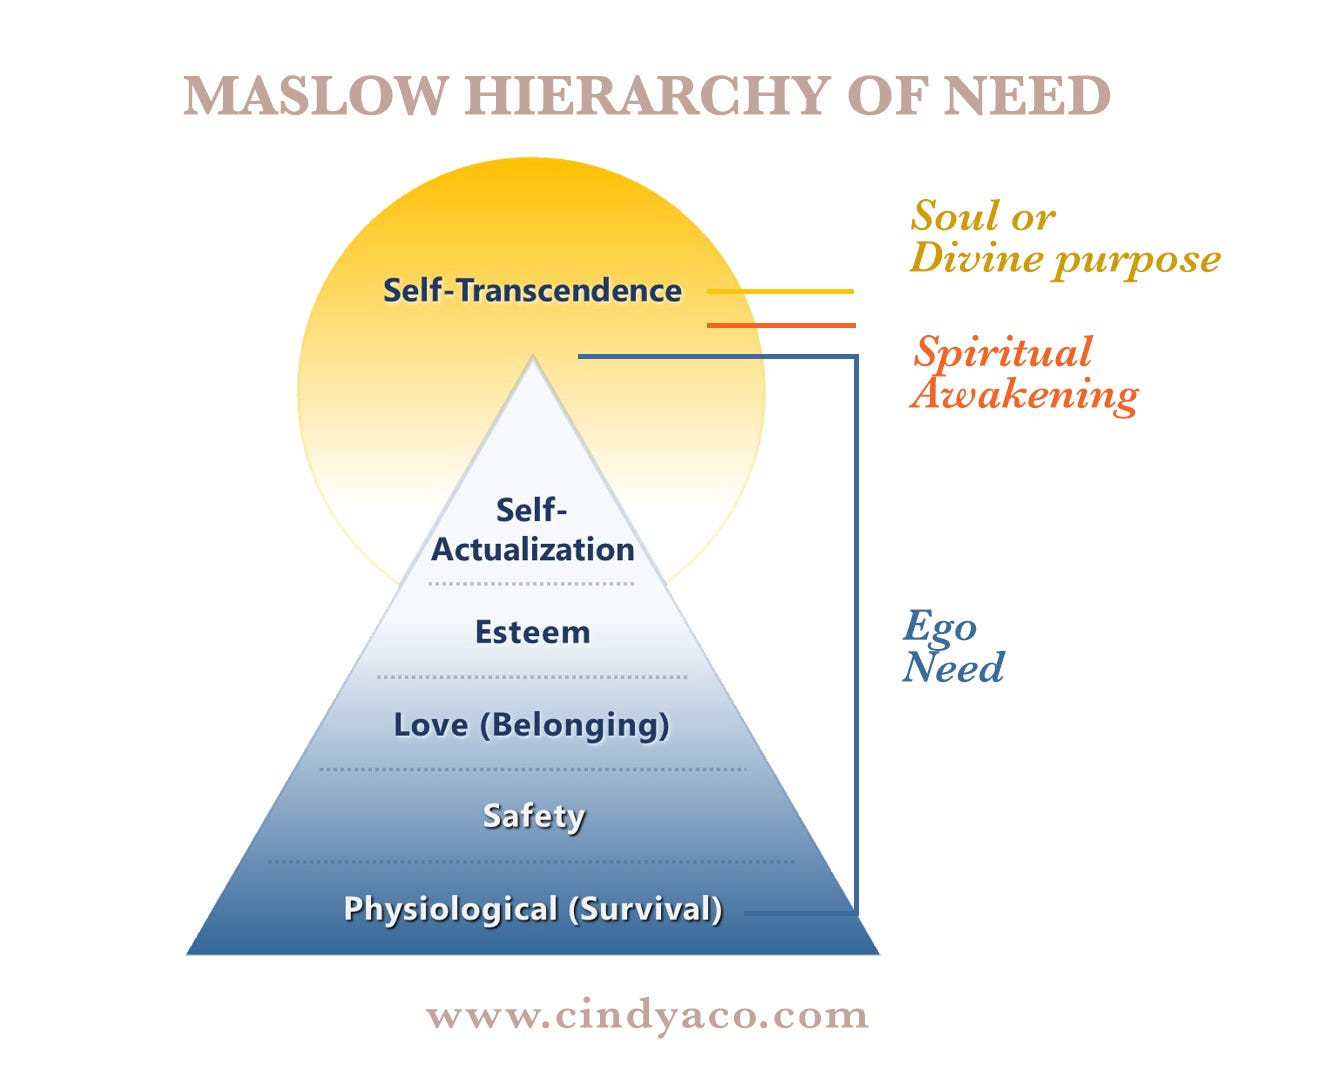 Hierarchy Transcendence